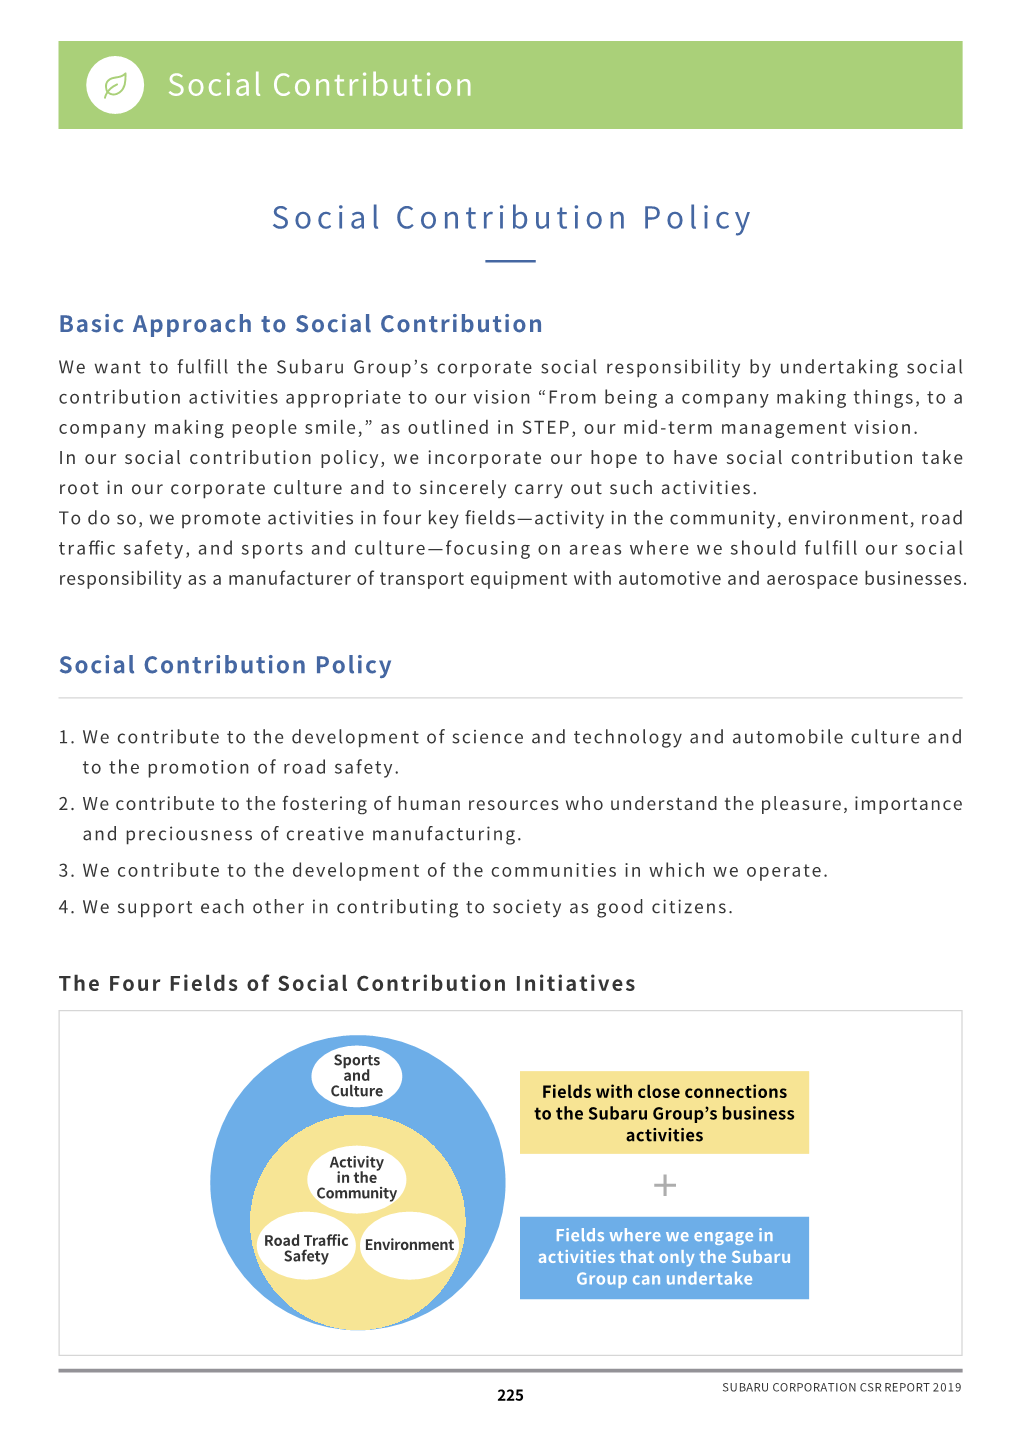 Social Contribution Policy, We Incorporate Our Hope to Have Social Contribution Take Root in Our Corporate Culture and to Sincerely Carry out Such Activities